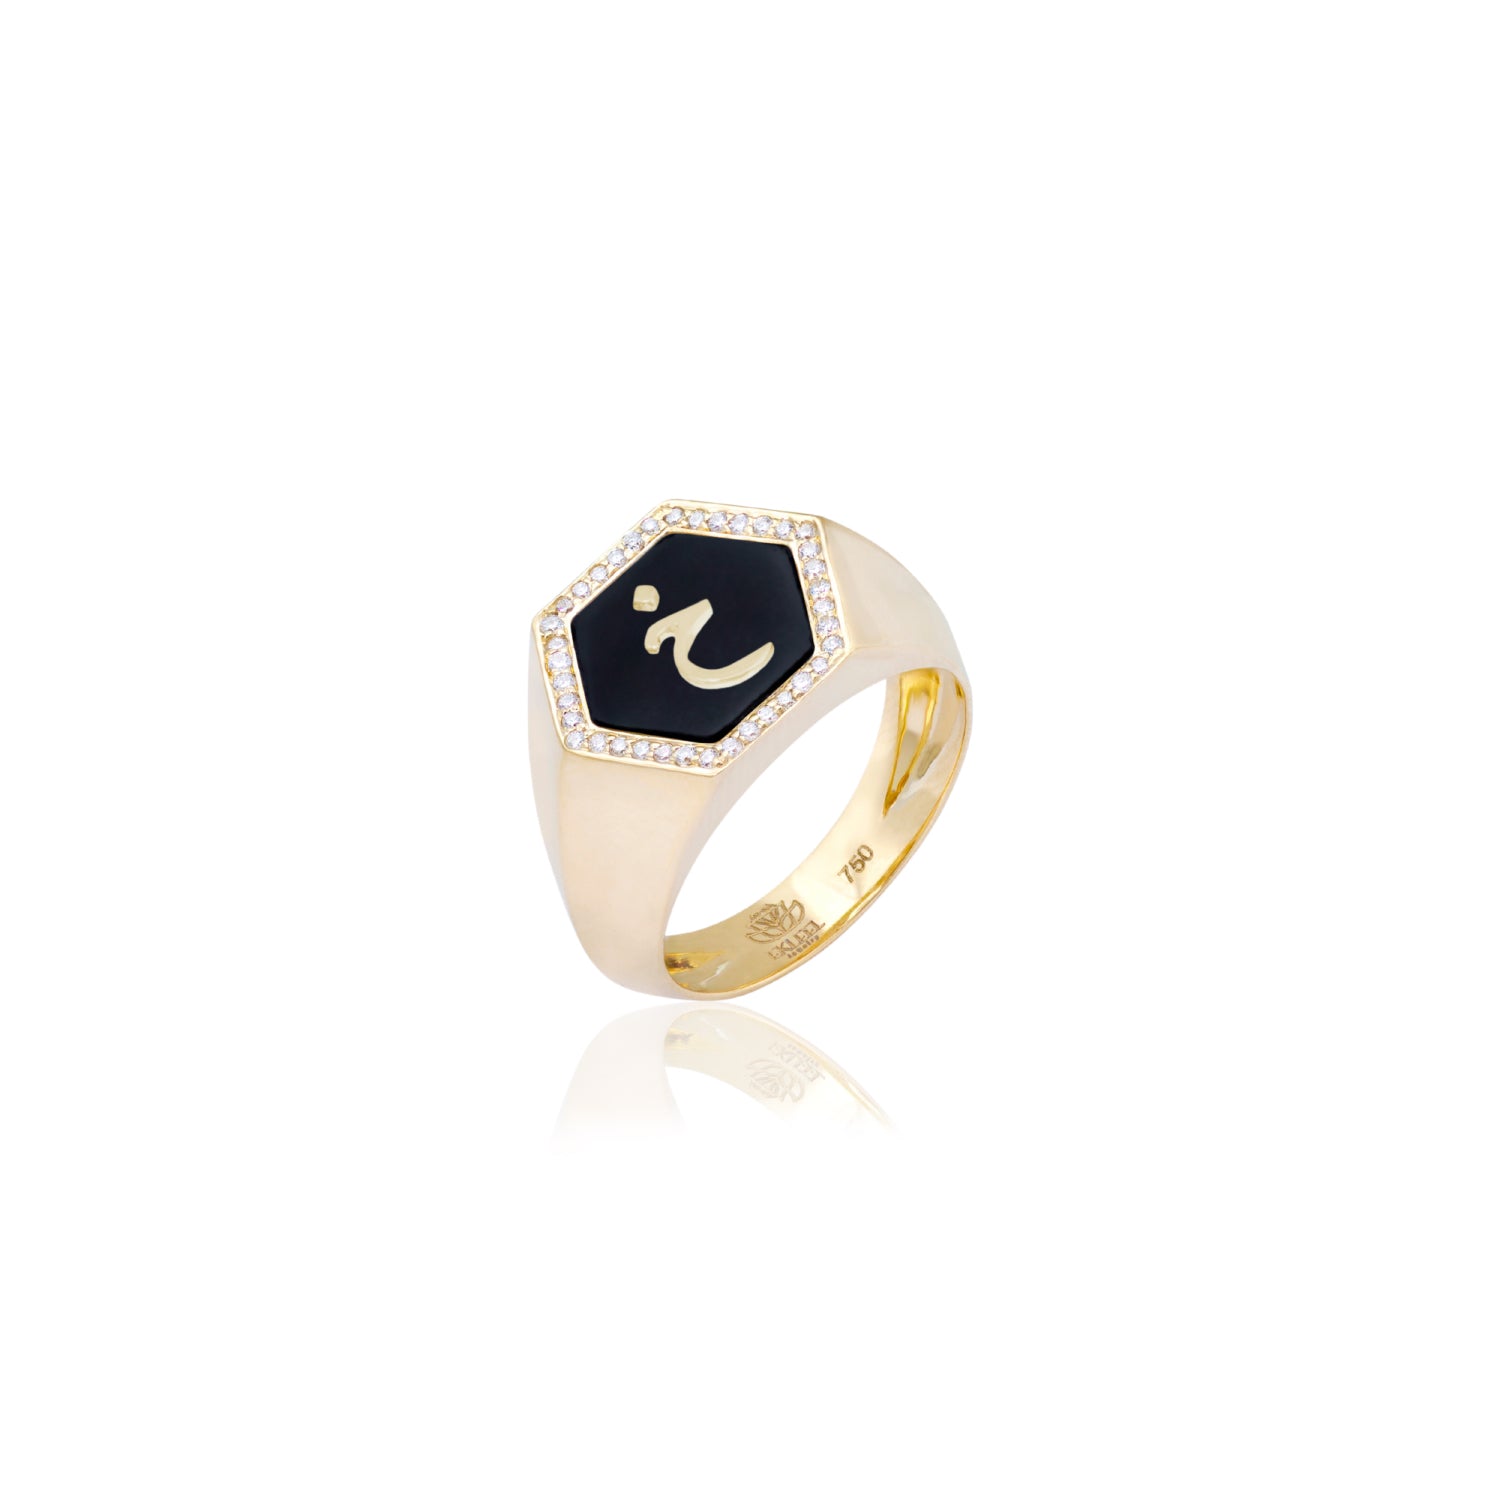 Qamoos 2.0 Letter خ Onyx and Diamond Signet Ring in Yellow Gold